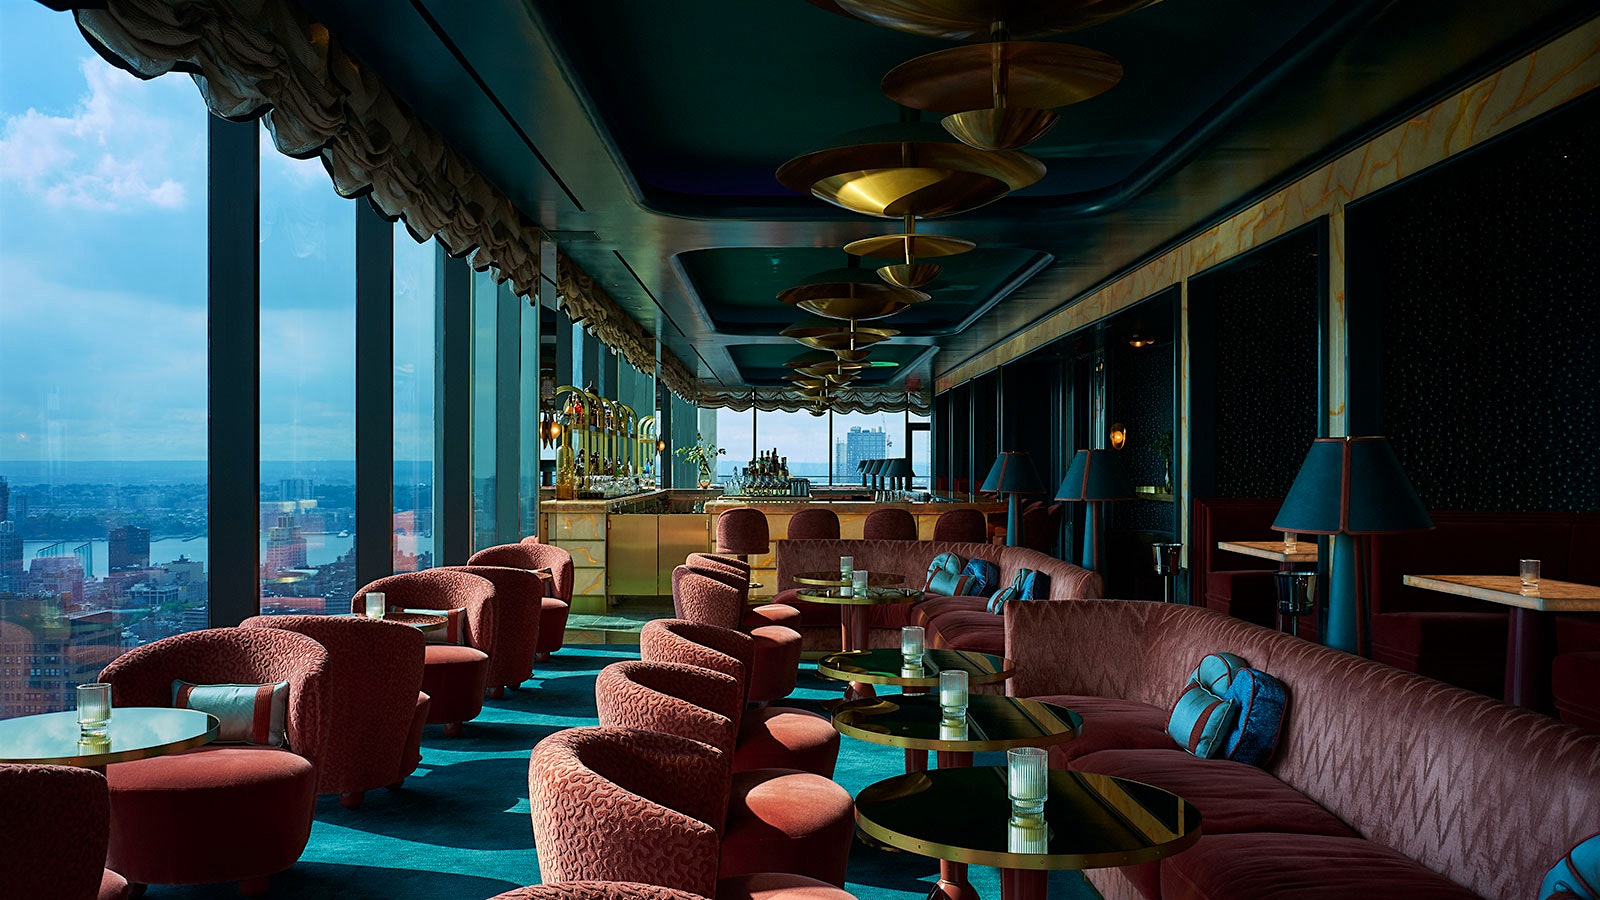  A daytime view of New York City out the floor-to-ceiling windows at Nubeluz cocktail bar, with aqua-tones, Burgundy-colored chairs and banquettes and golden light fixtures